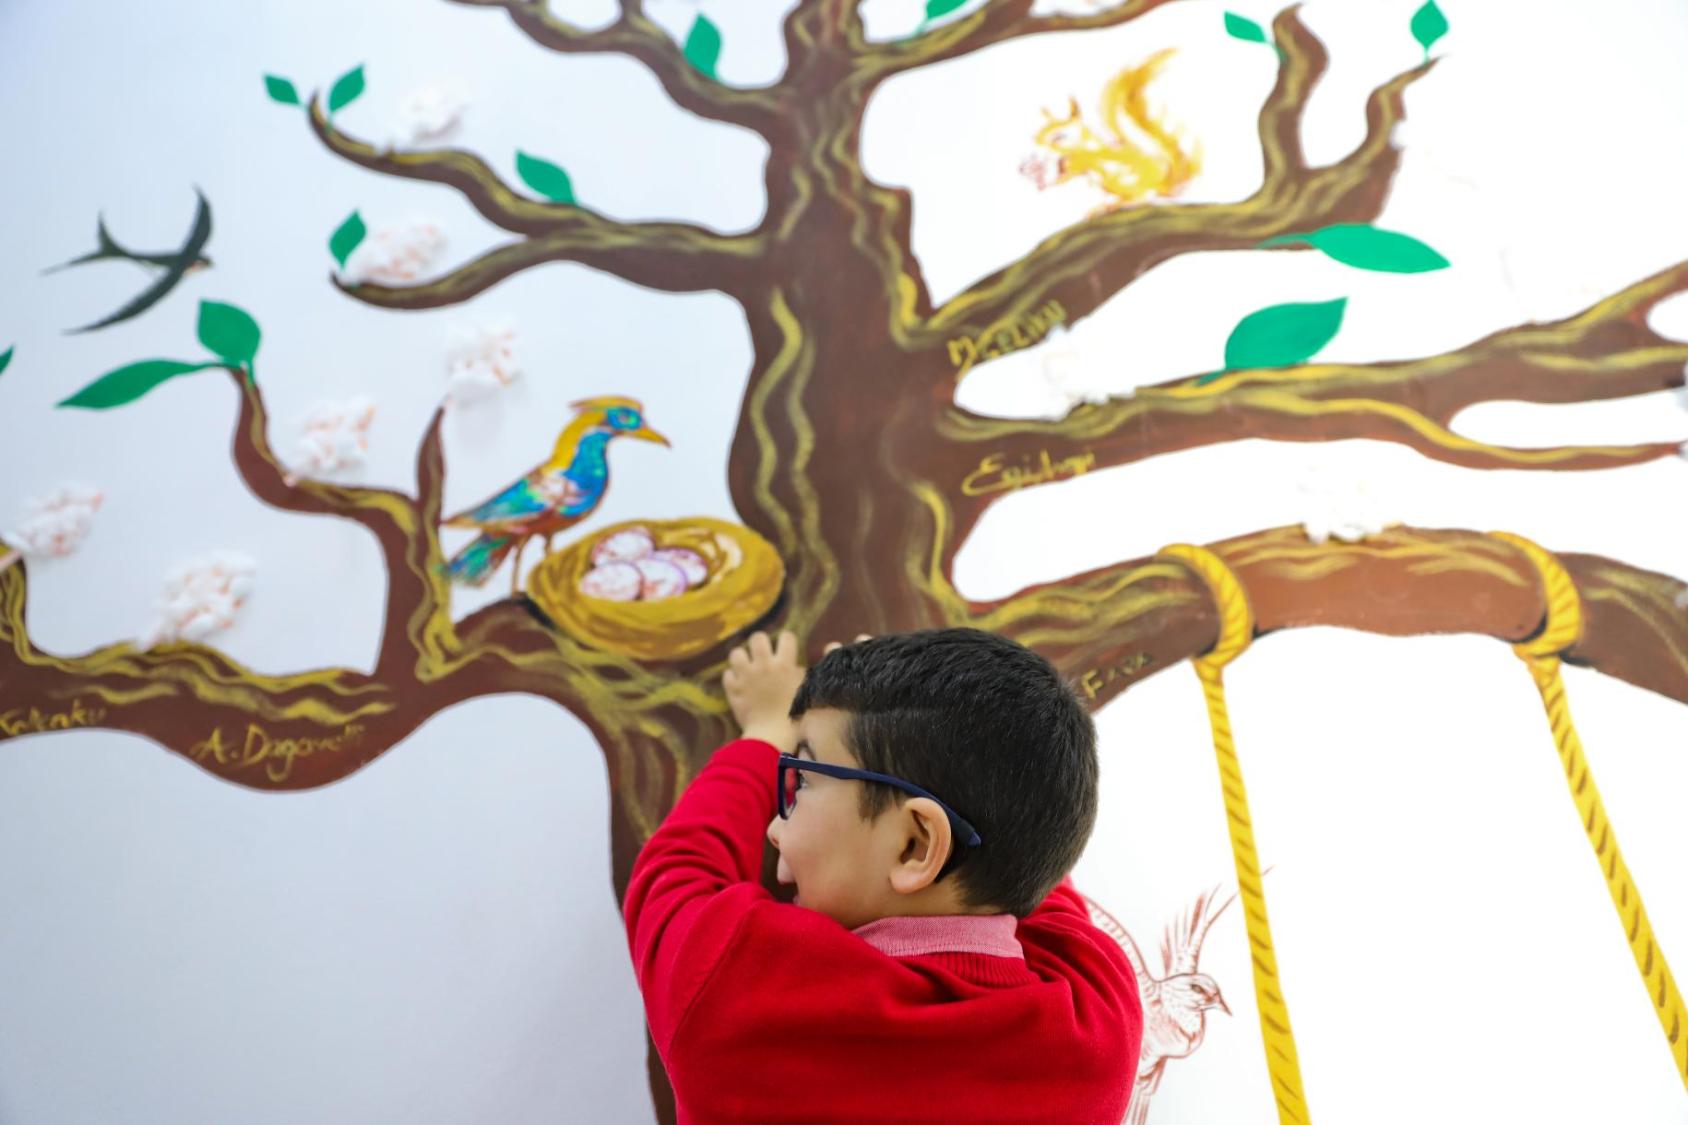 A child in a red sweater stands against a wall with a tree painted on it